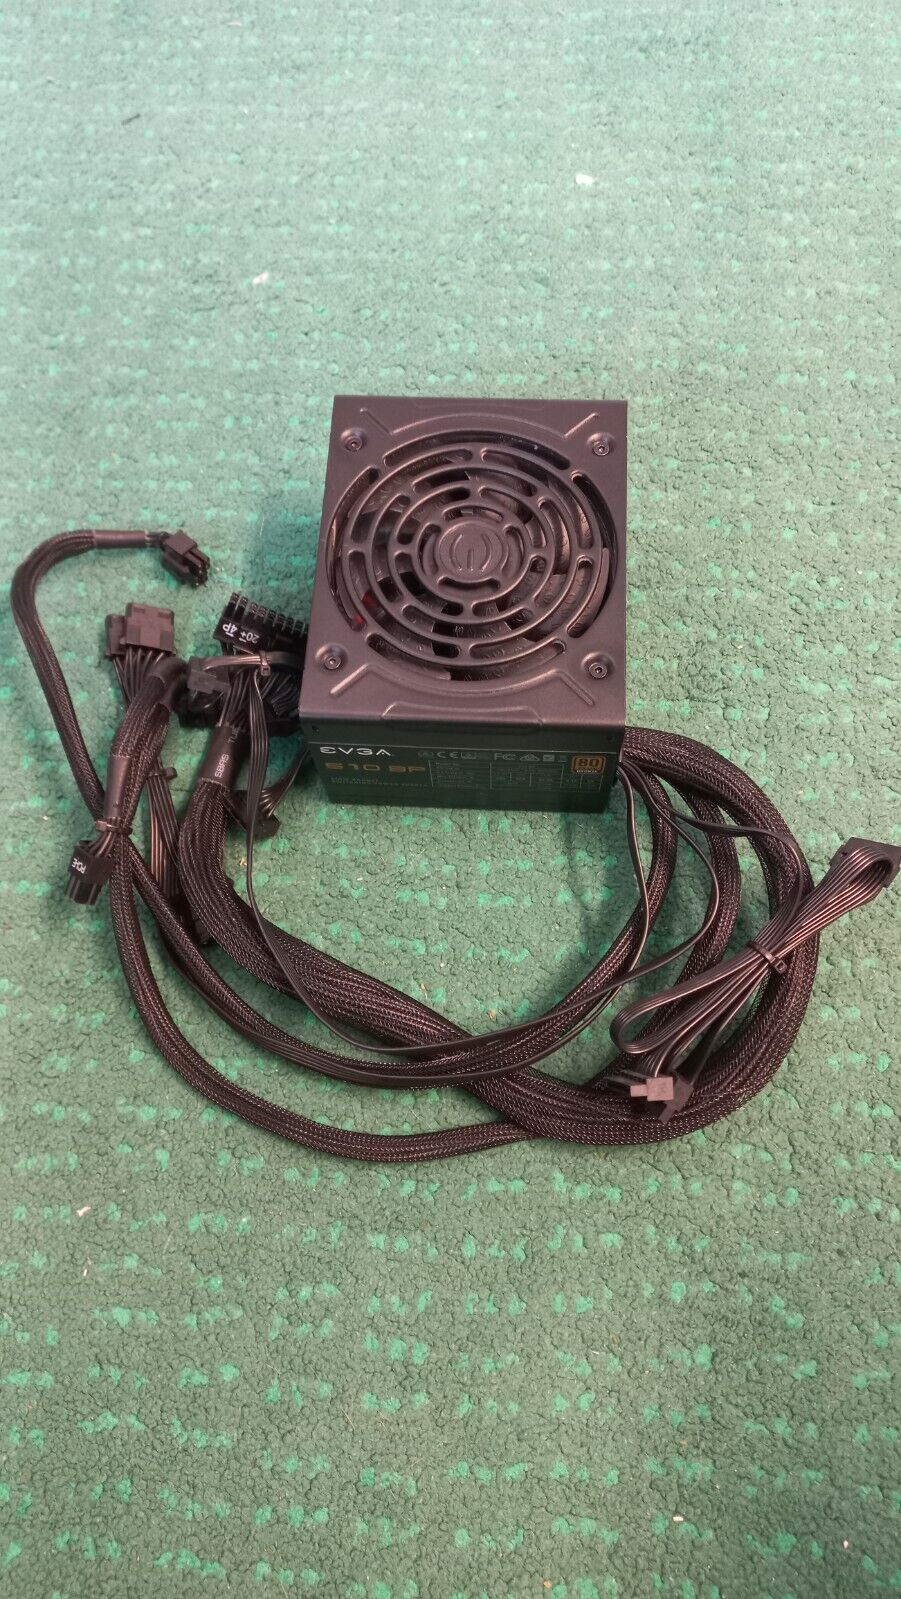 EVGA 510 BP 80 Bronze Power Supply 510W Barely used, fully functional